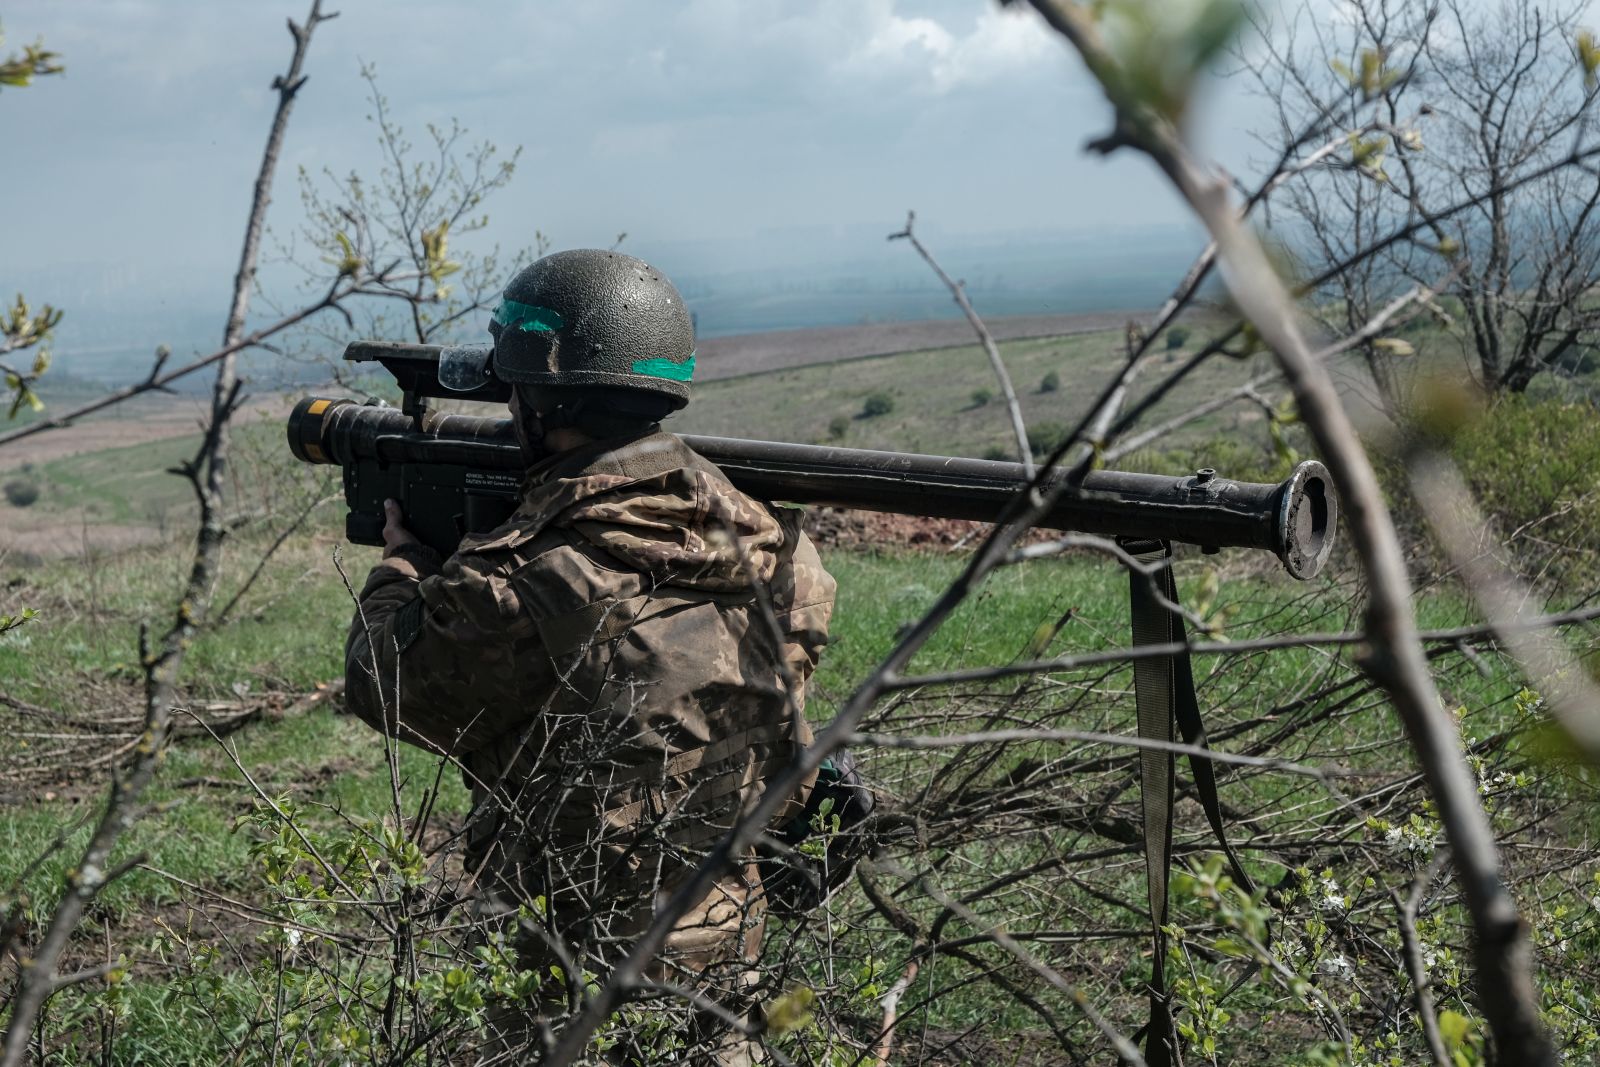 epa10588140 A member of the Ukrainian army's anti-aircraft missile division of the 57th Brigade in position outside of Bakhmut, Ukraine, 23 April 2023. Russian troops entered Ukrainian territory in February 2022, starting a conflict that has provoked destruction and a humanitarian crisis.  EPA/Maria Senovilla